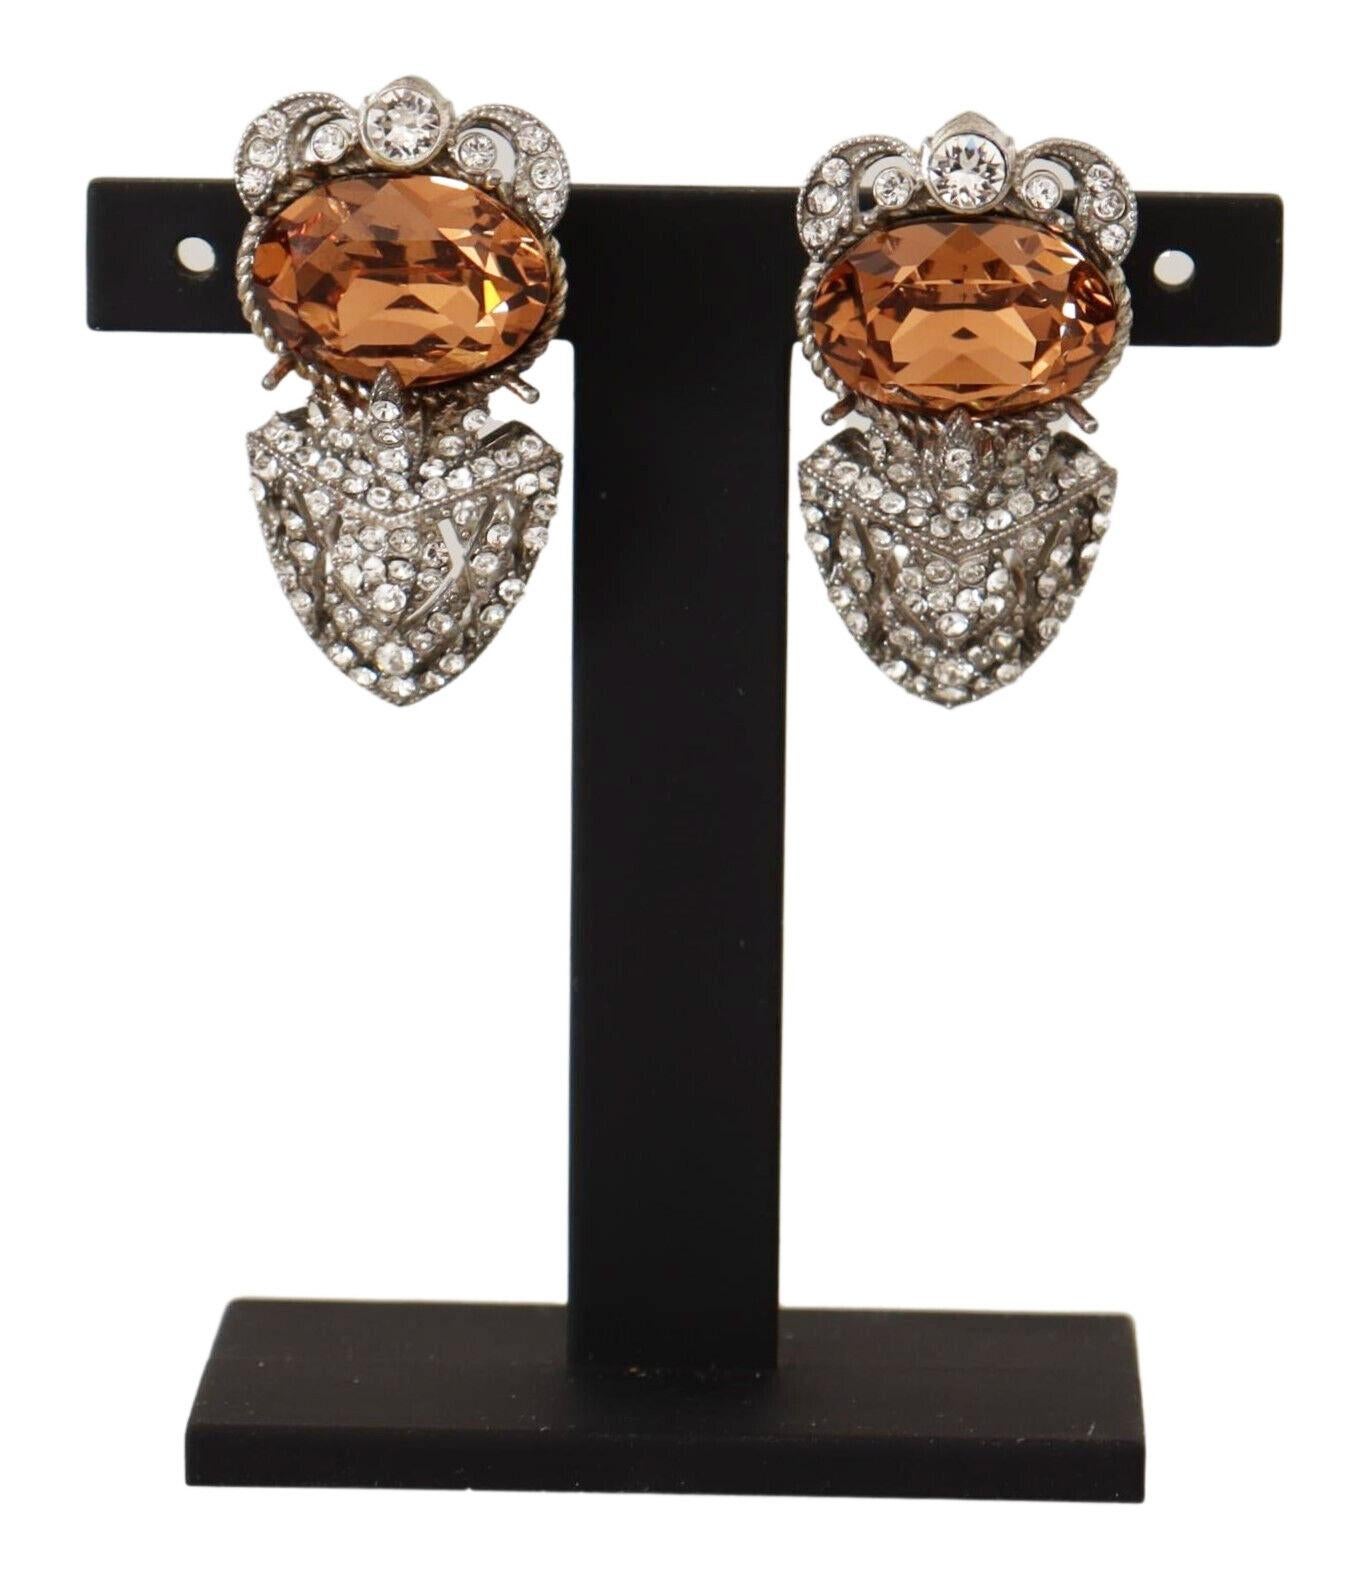 Dolce & Gabbana

Gorgeous brand new with tags, 100% Authentic Dolce & Gabbana Earrings.

Model: Screw back closure
Motive: Sicily
Material: 70% Sterling 925 Silver, 30% Glass

Color: Silver
Crystals: Clear and orange

Logo details
Made in